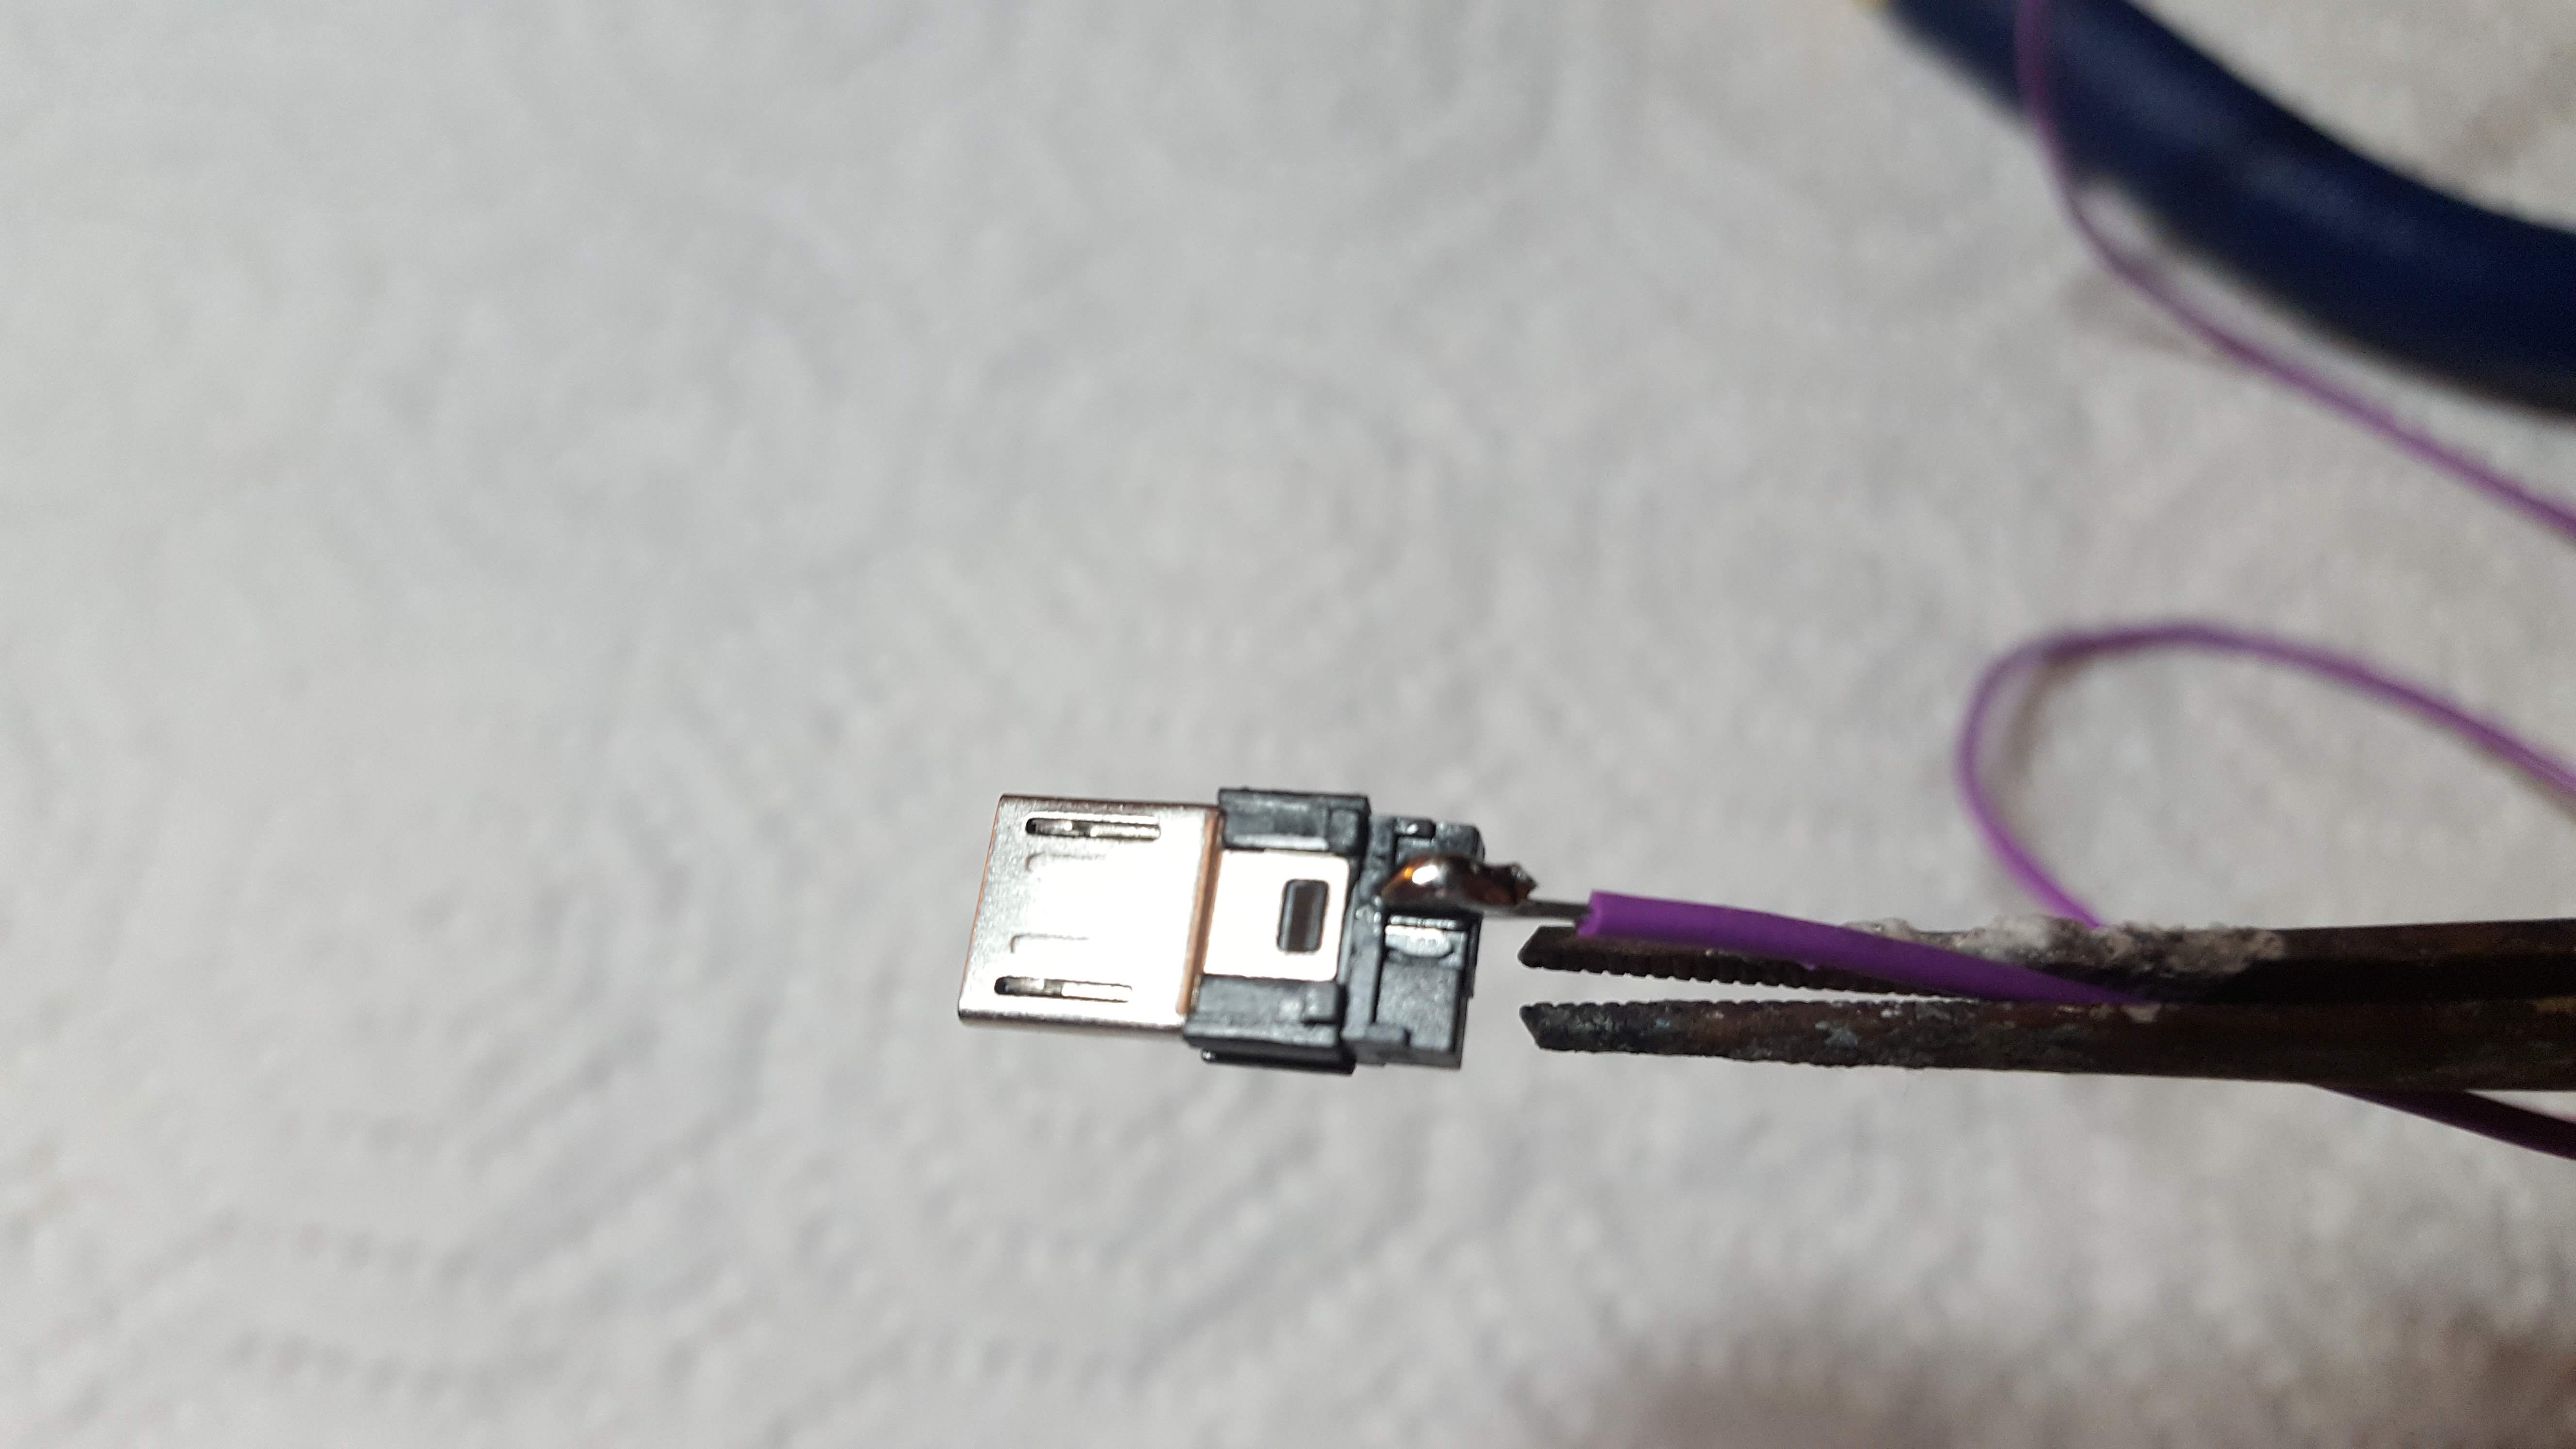 Micro USB with solder on pin 4